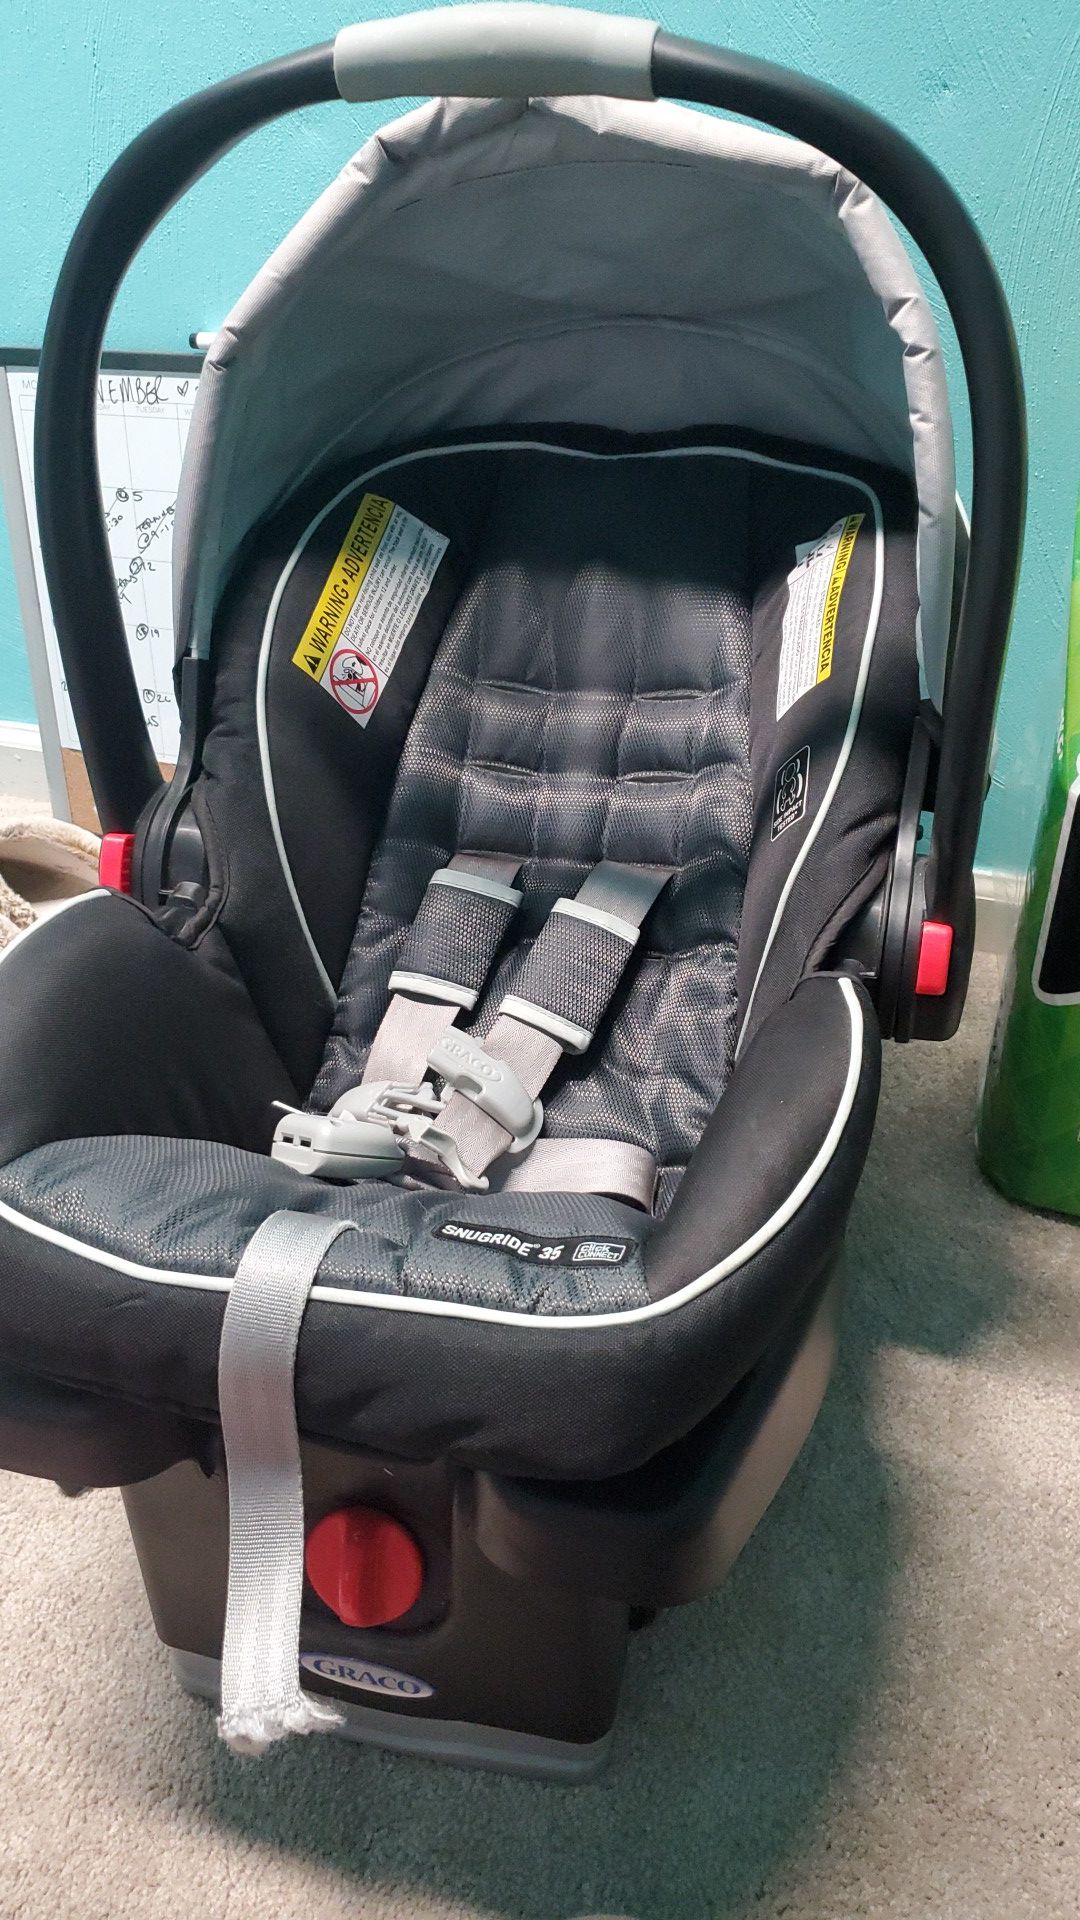 Graco infant car seat and base